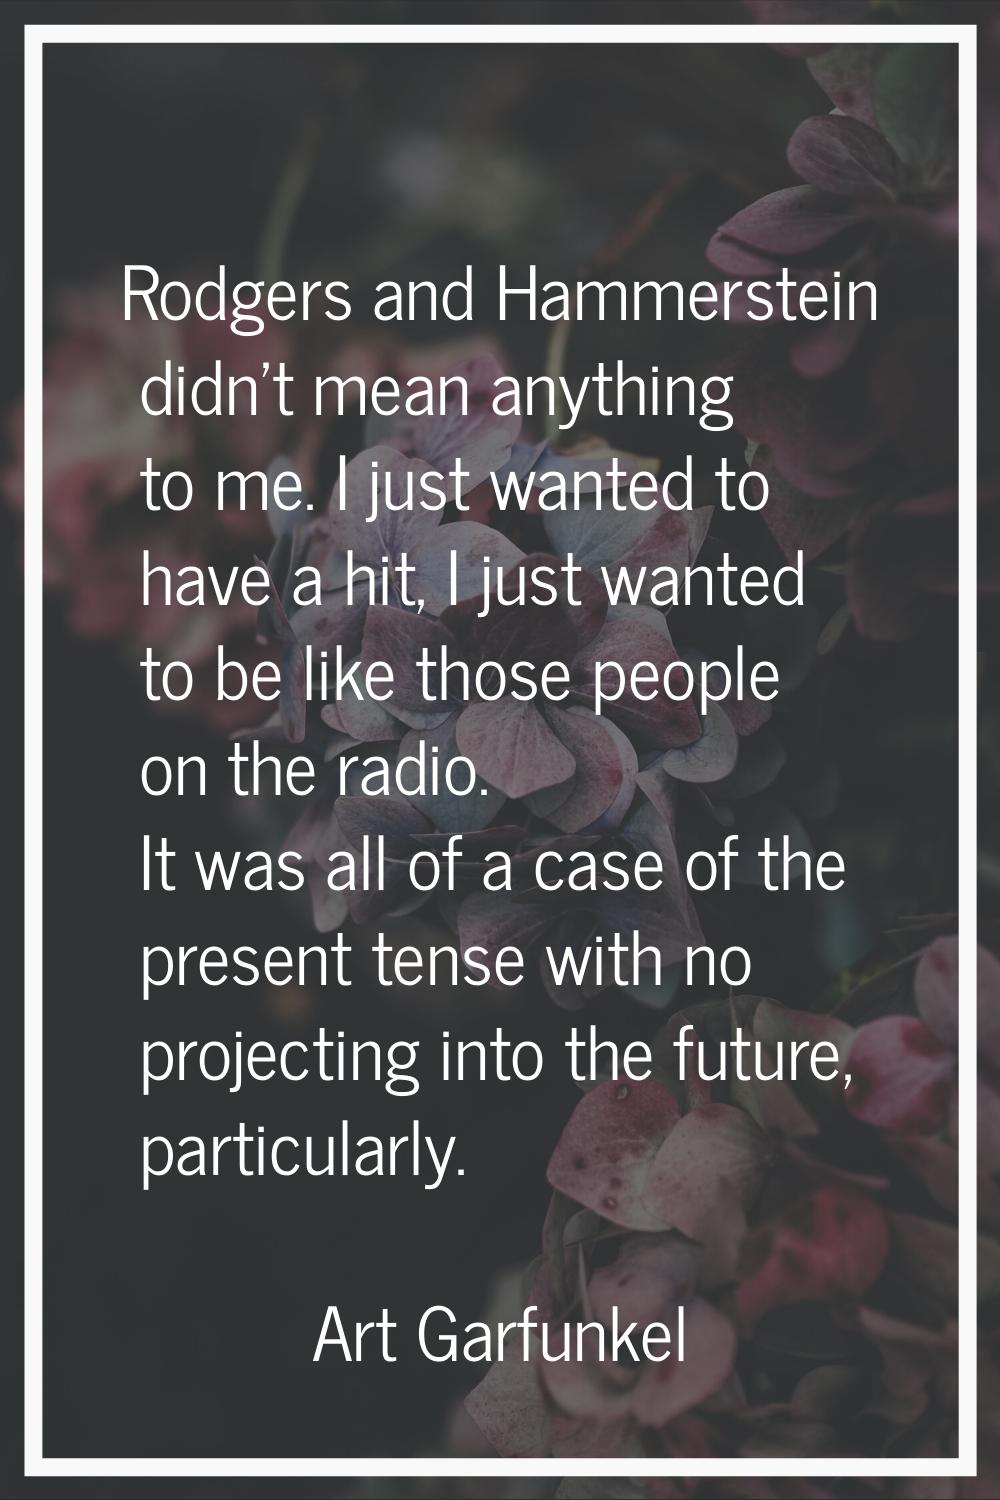 Rodgers and Hammerstein didn't mean anything to me. I just wanted to have a hit, I just wanted to b